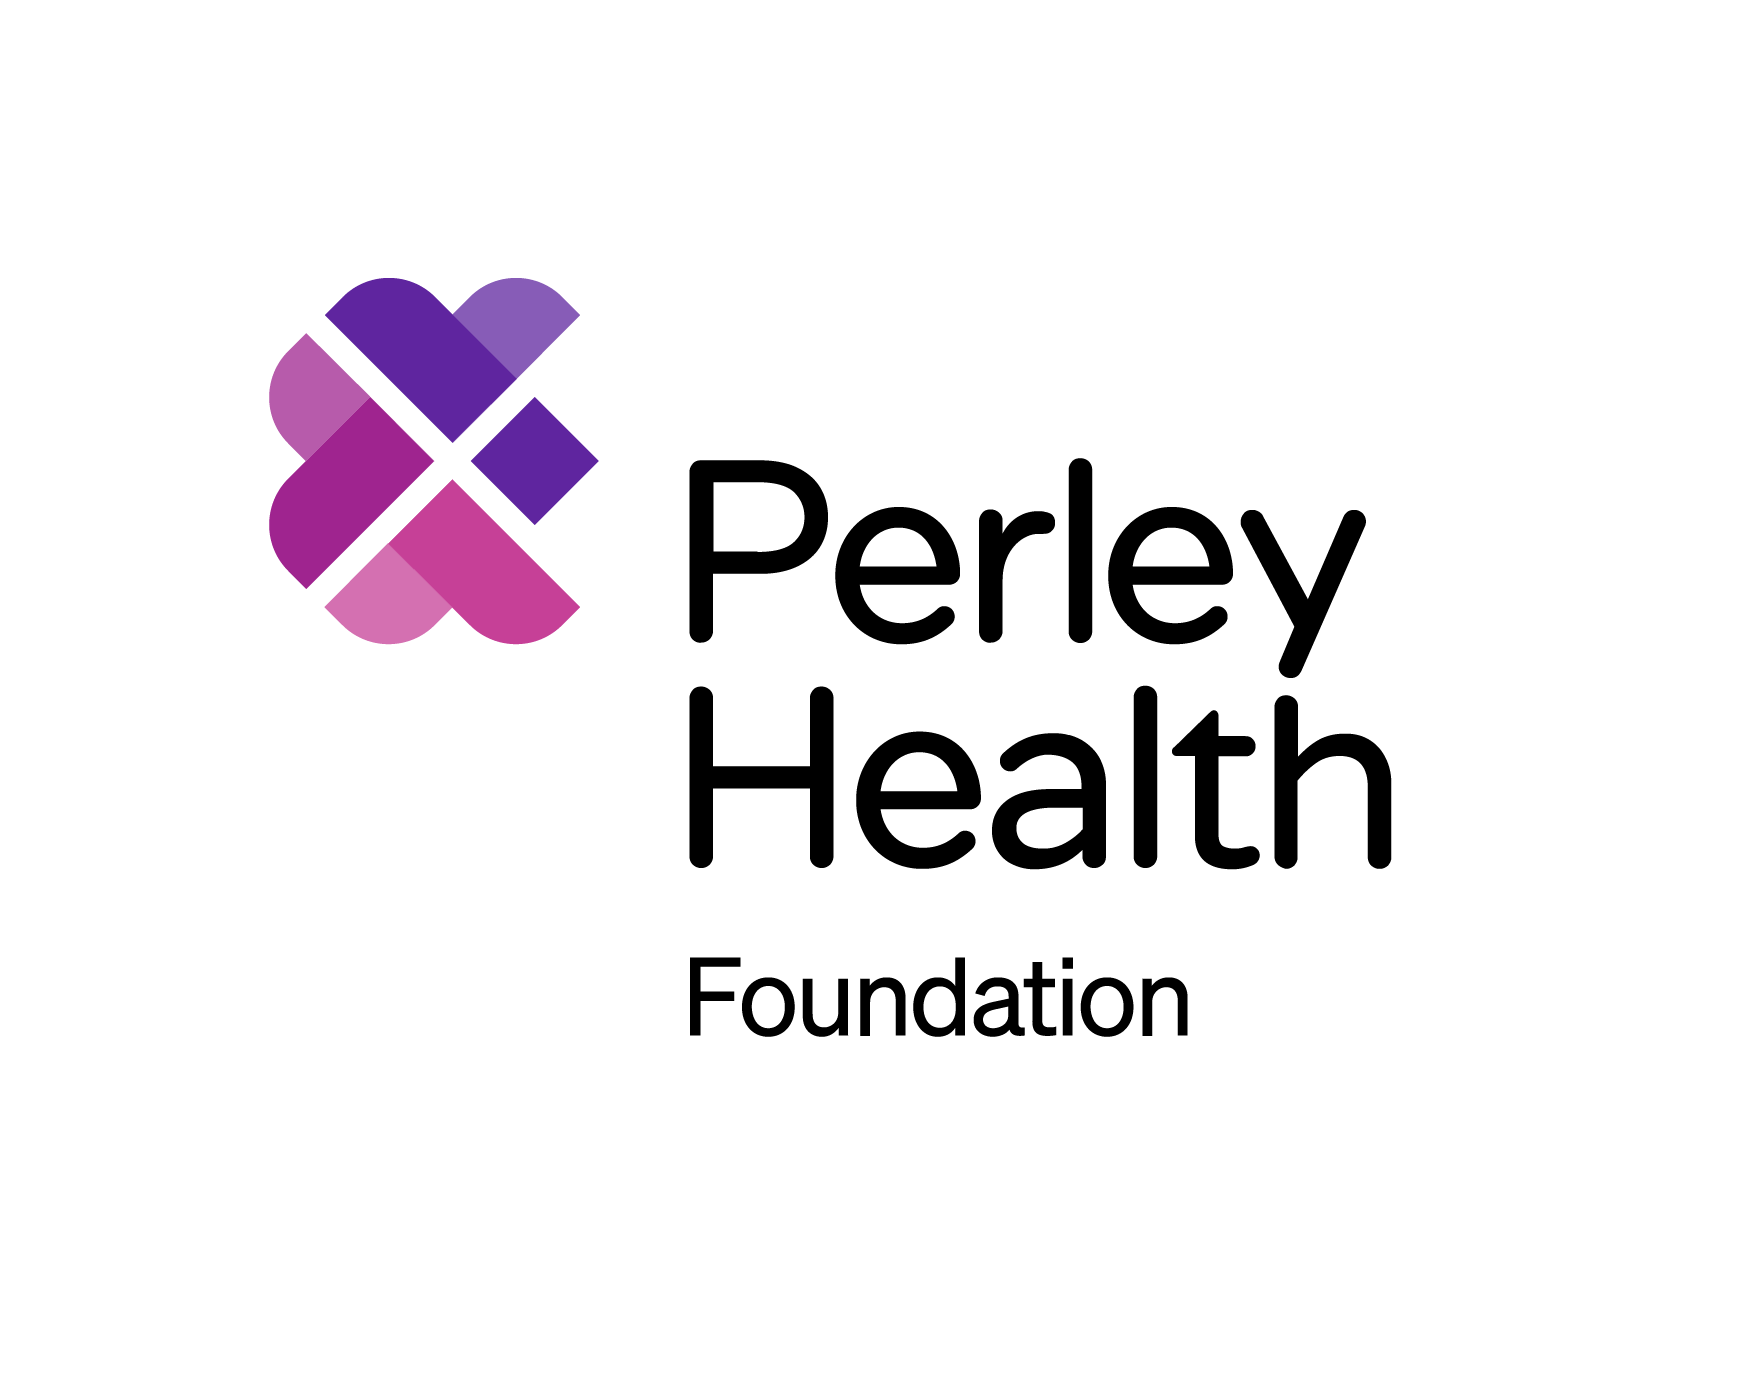 Perley_Health_Foundation_HEX-Top Left.png